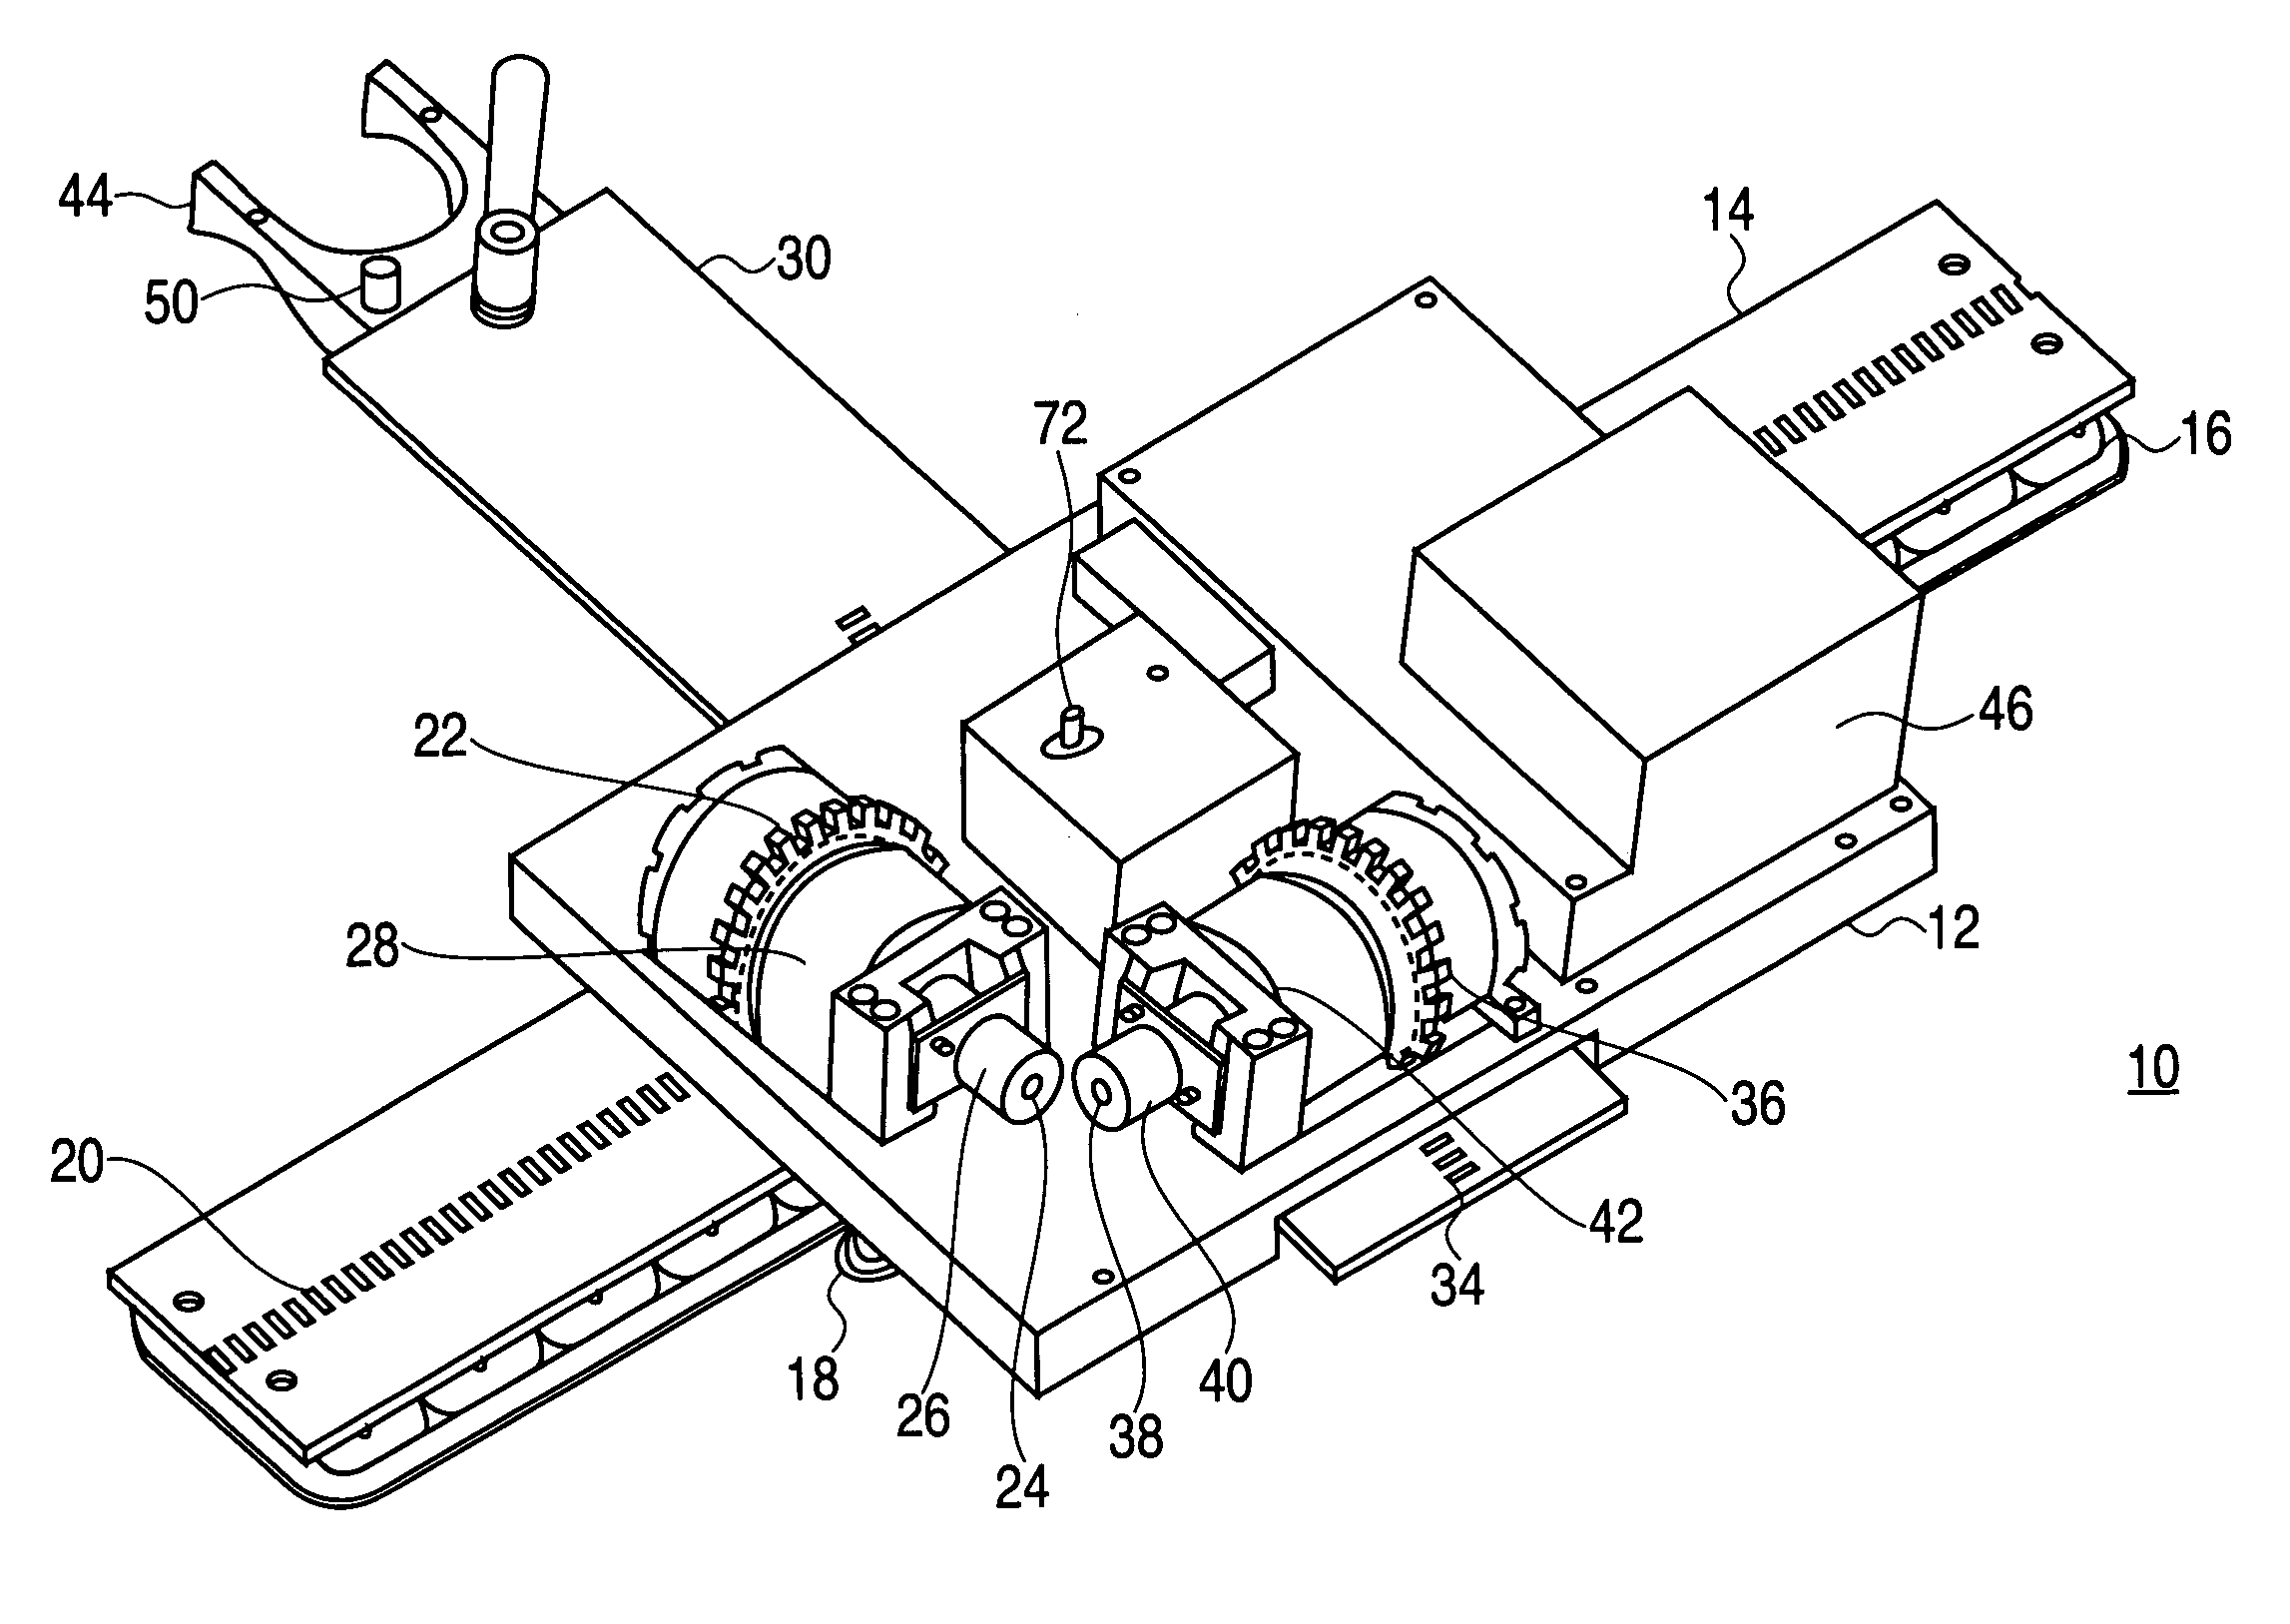 Automatic position-locking tool carrier apparatus and method